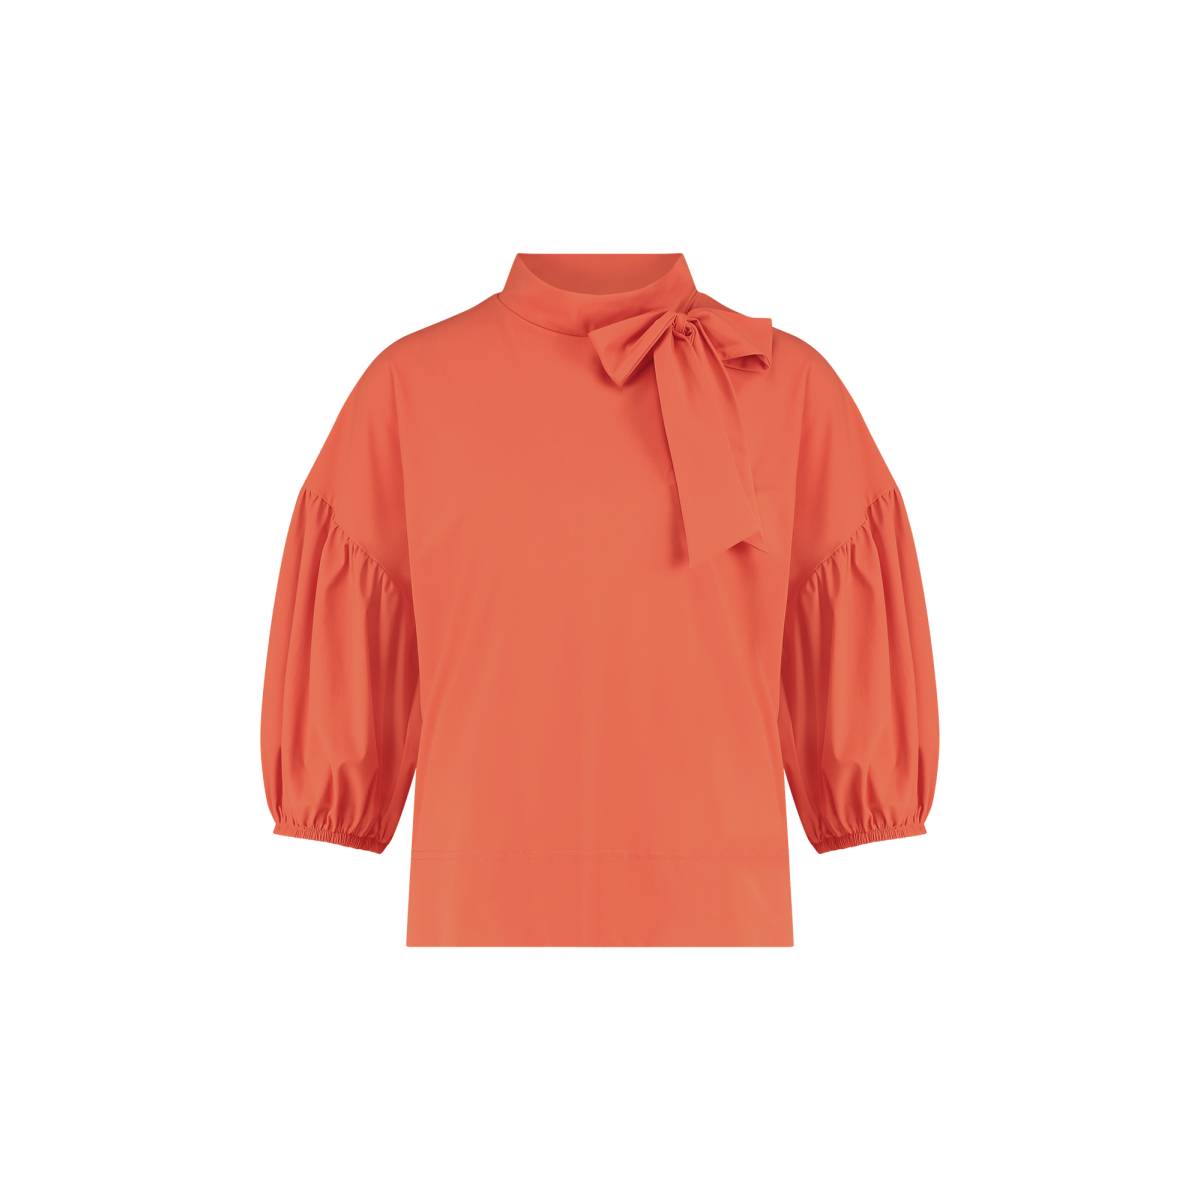 Studio Anneloes July small bow blouse 07728 Oranje